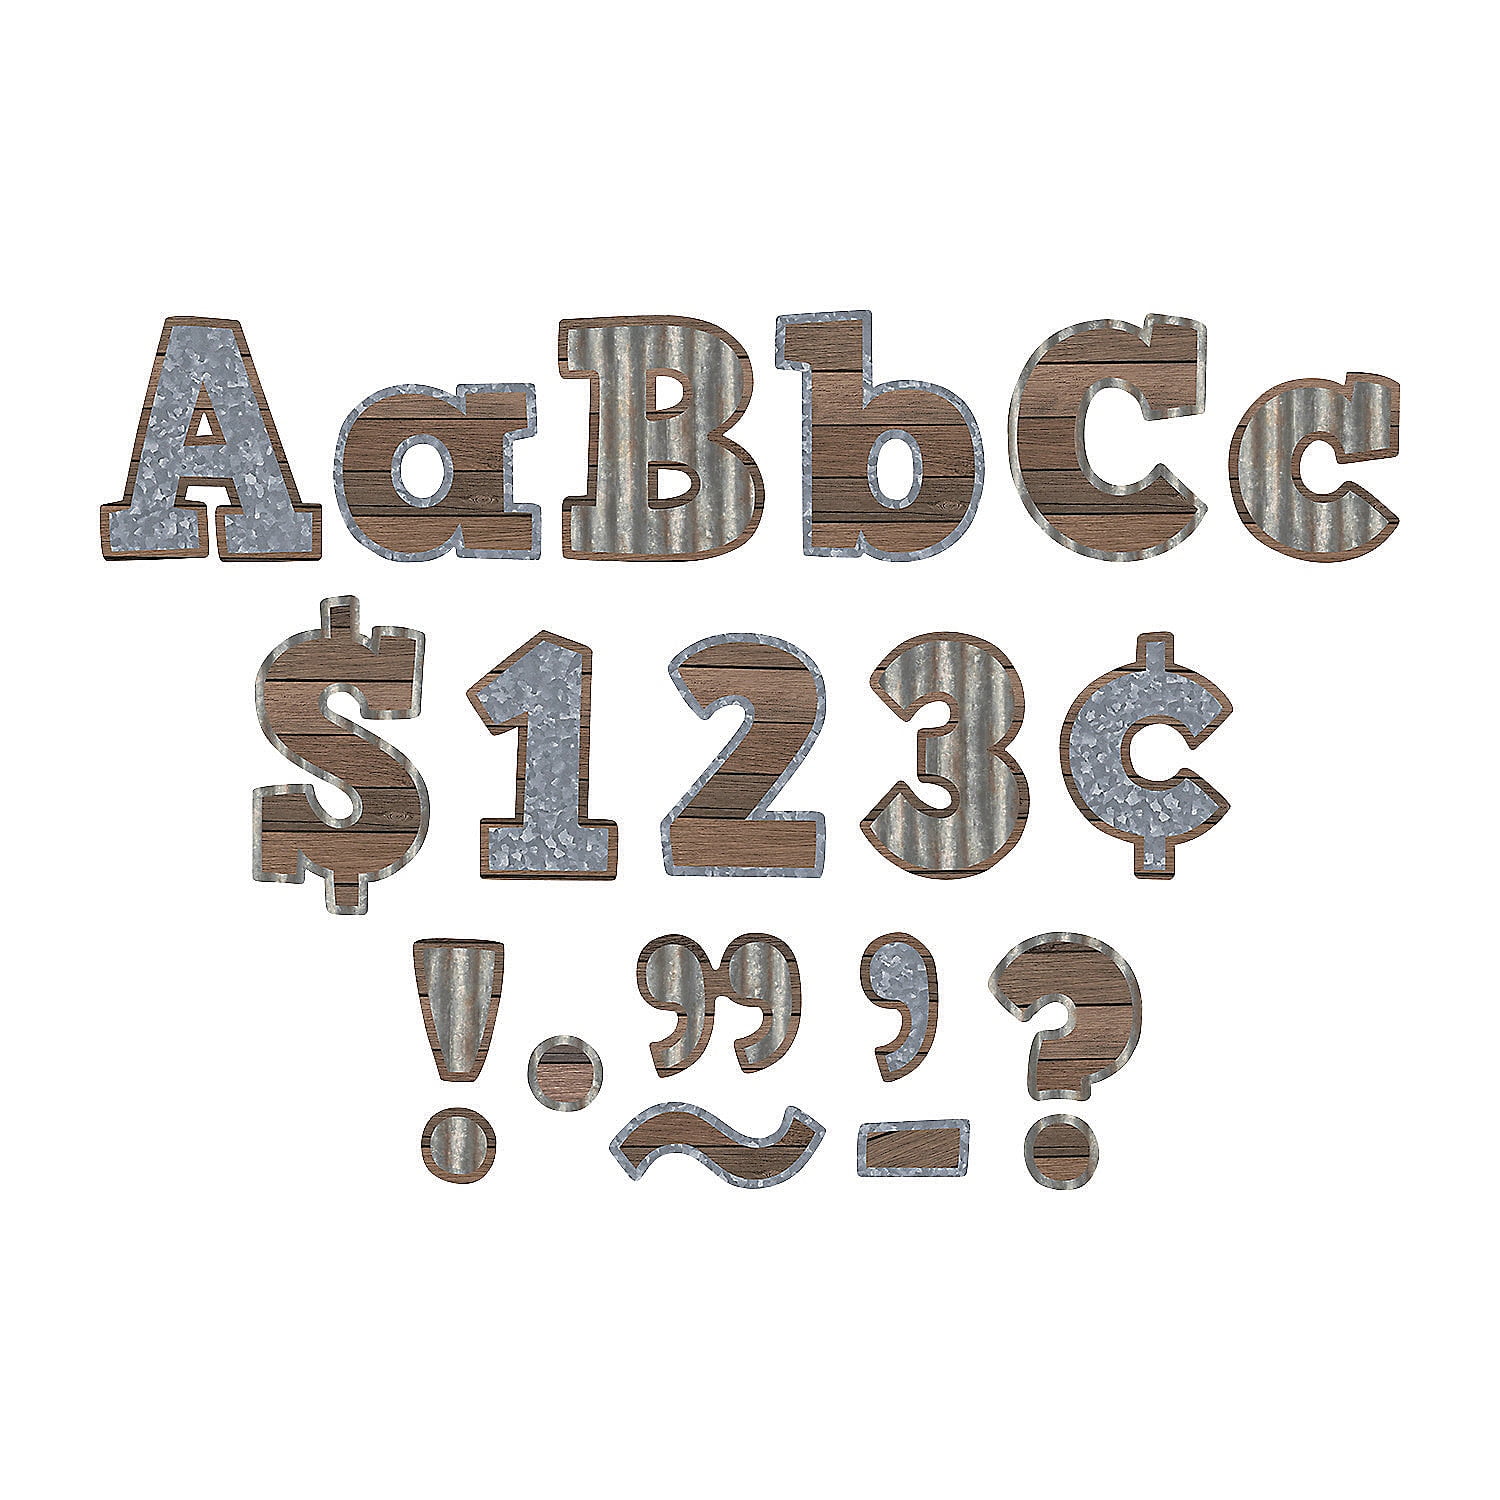 Colarr 216 Pcs Glitter Bulletin Board Letters for Classroom Numbers  Alphabet Poster Board Letters with Adhesive Dots Punctuation Symbols Cutout